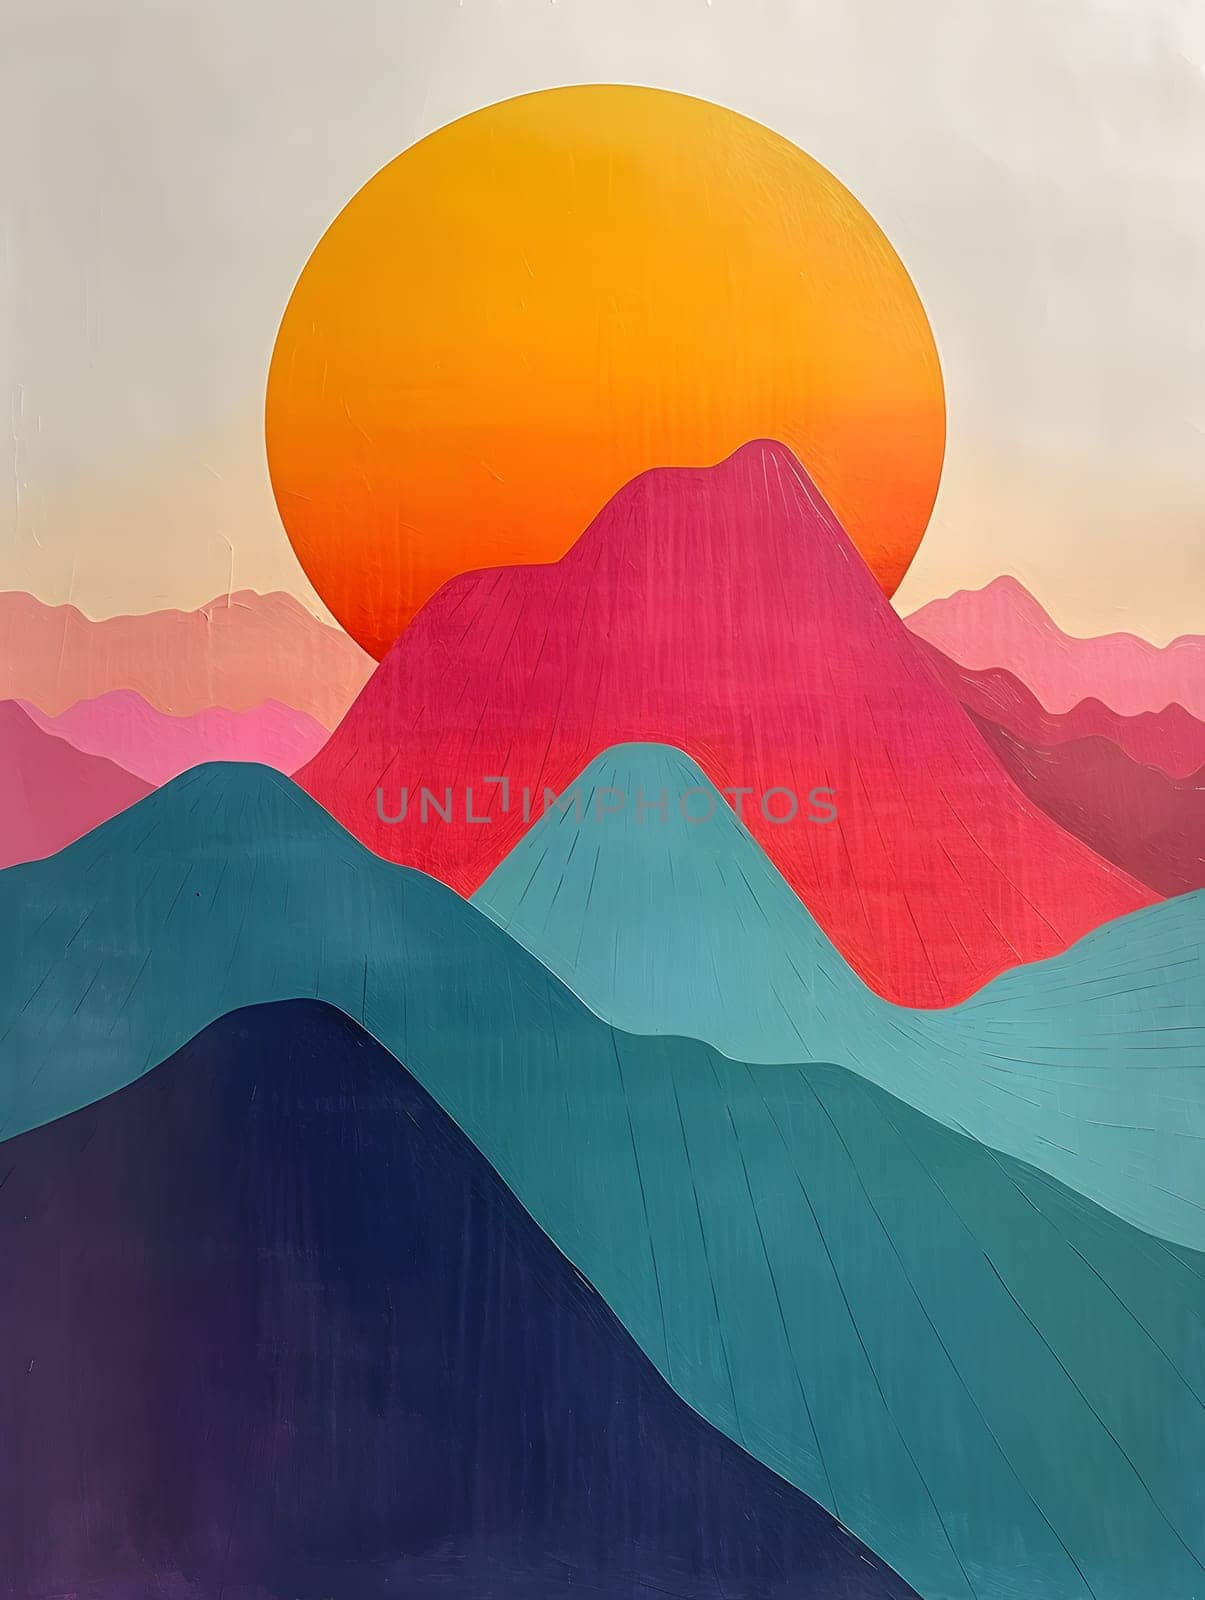 Vibrant painting captures the orange sky of a sunset over a mountain range by Nadtochiy